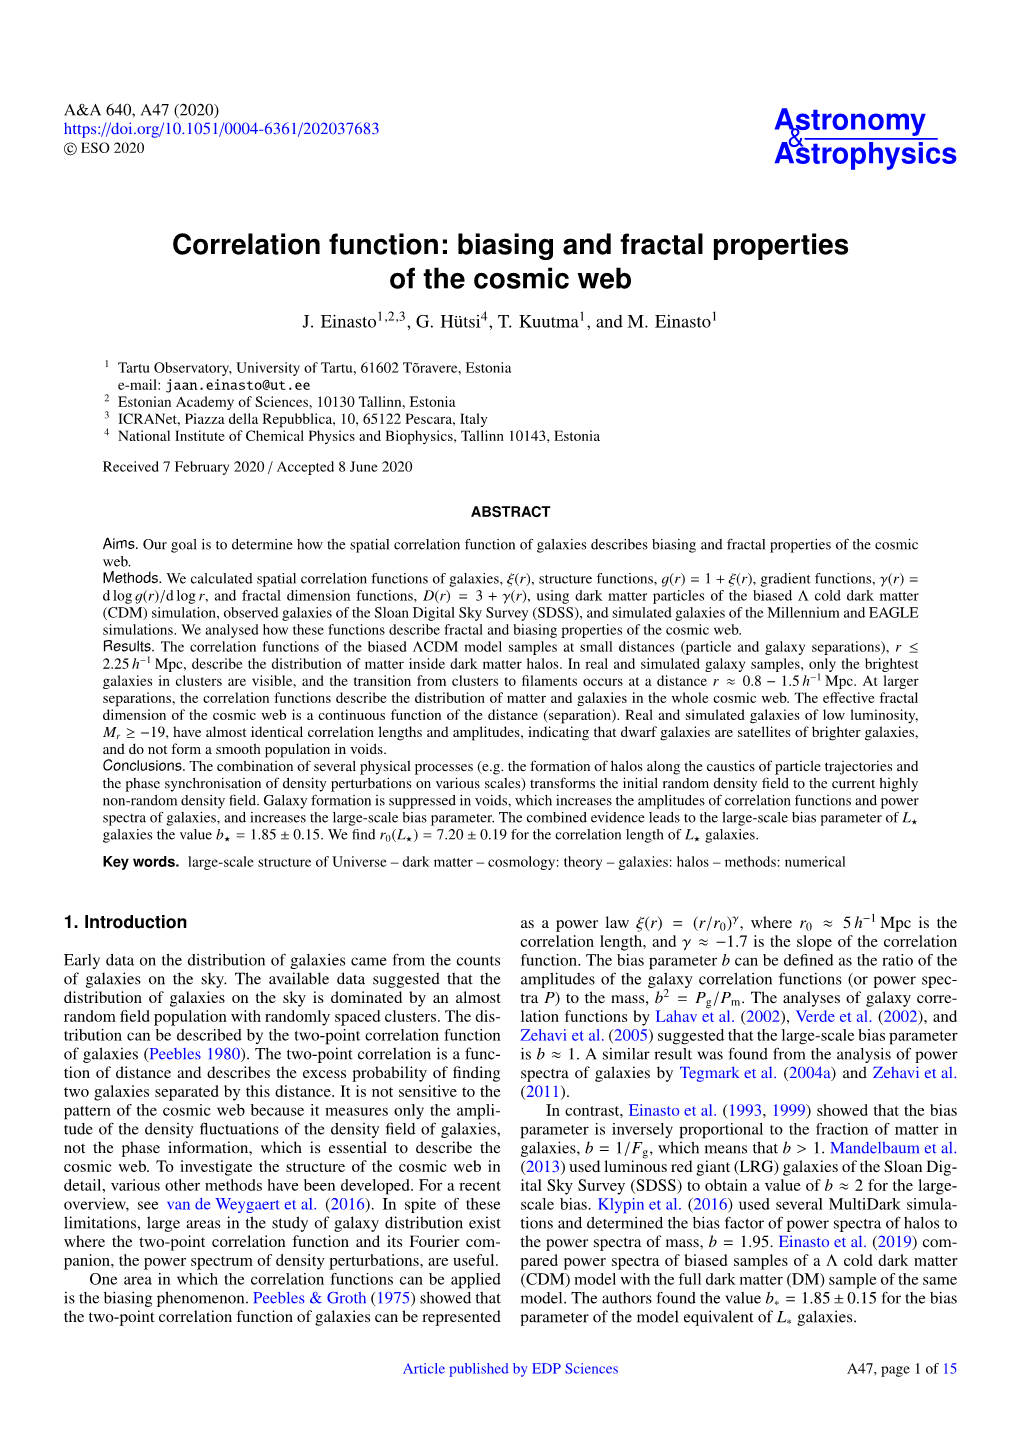 Correlation Function: Biasing and Fractal Properties of the Cosmic Web J